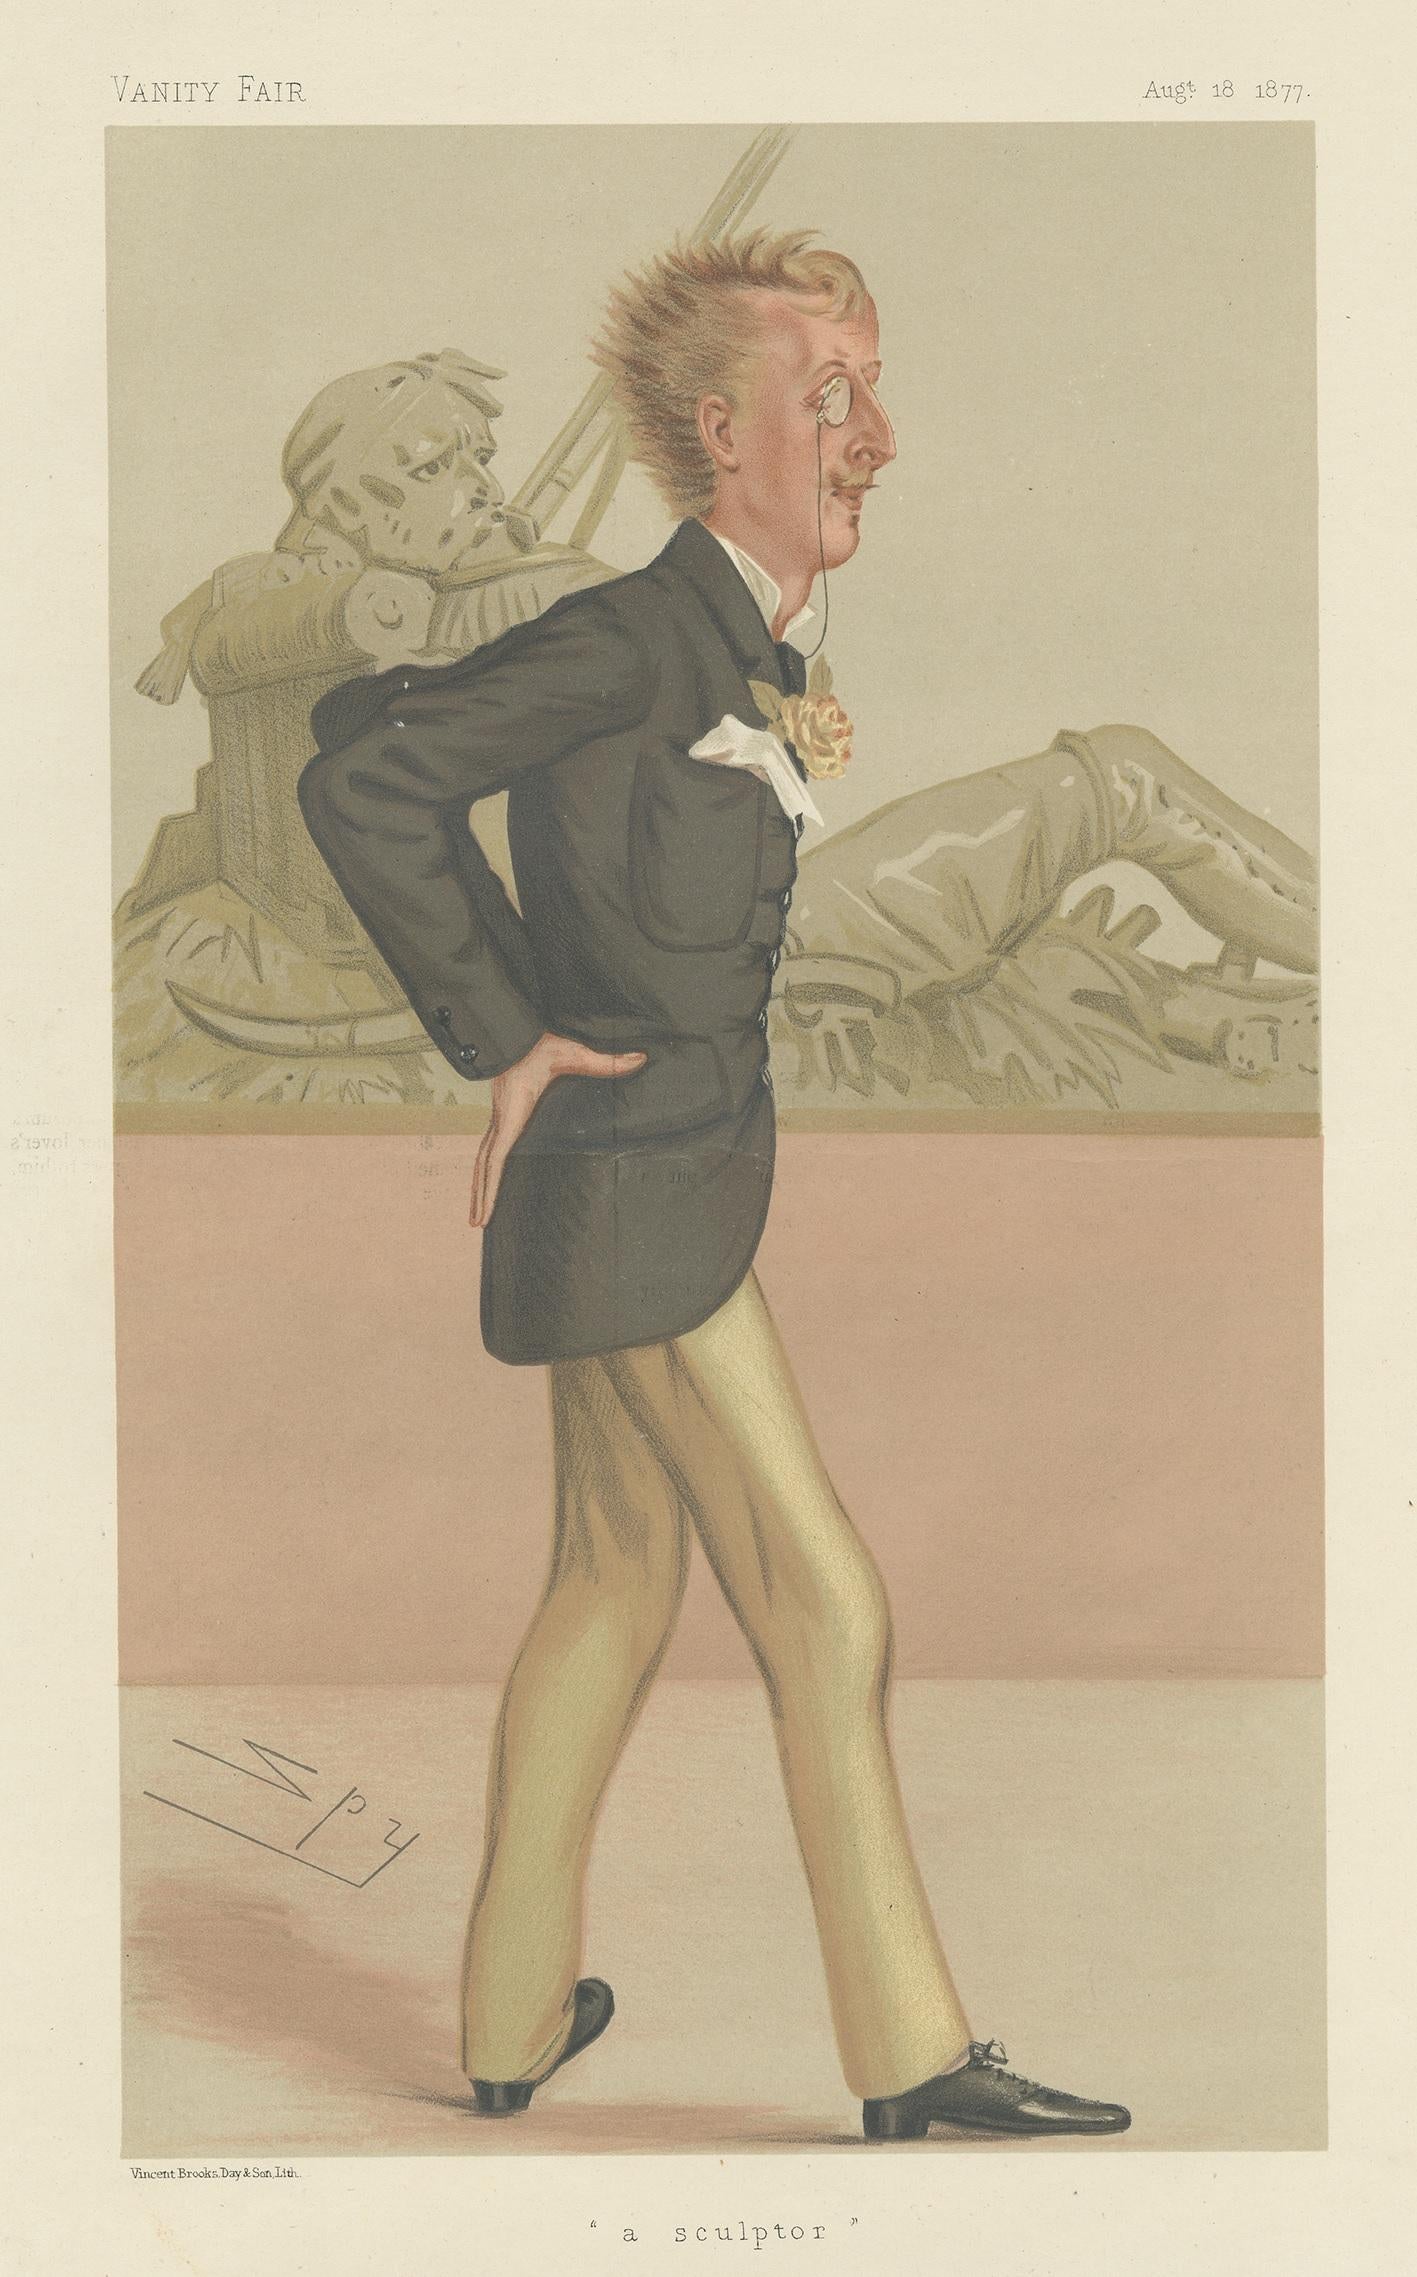 Antique print titled 'A Sculptor'. Lord Ronald Charles Sutherland-Leveson-Gower (2 August 1845–9 March 1916), known as Lord Ronald Gower, was a Scottish Liberal politician, sculptor and writer from the Leveson-Gower family. This caricature print